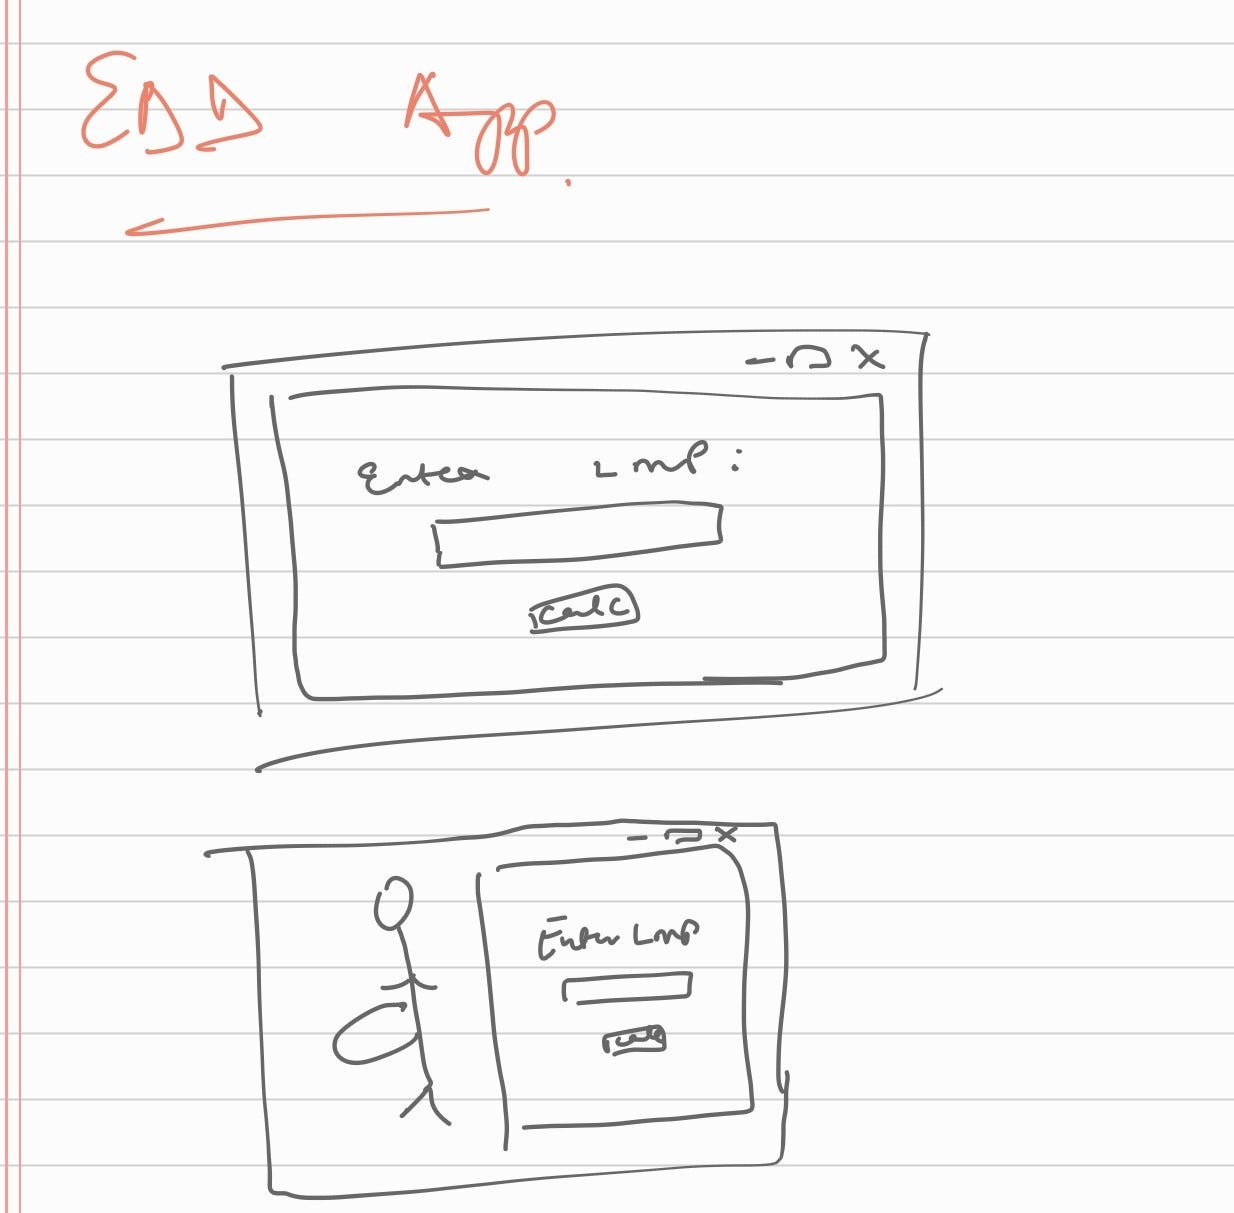 rough sketch of the interface